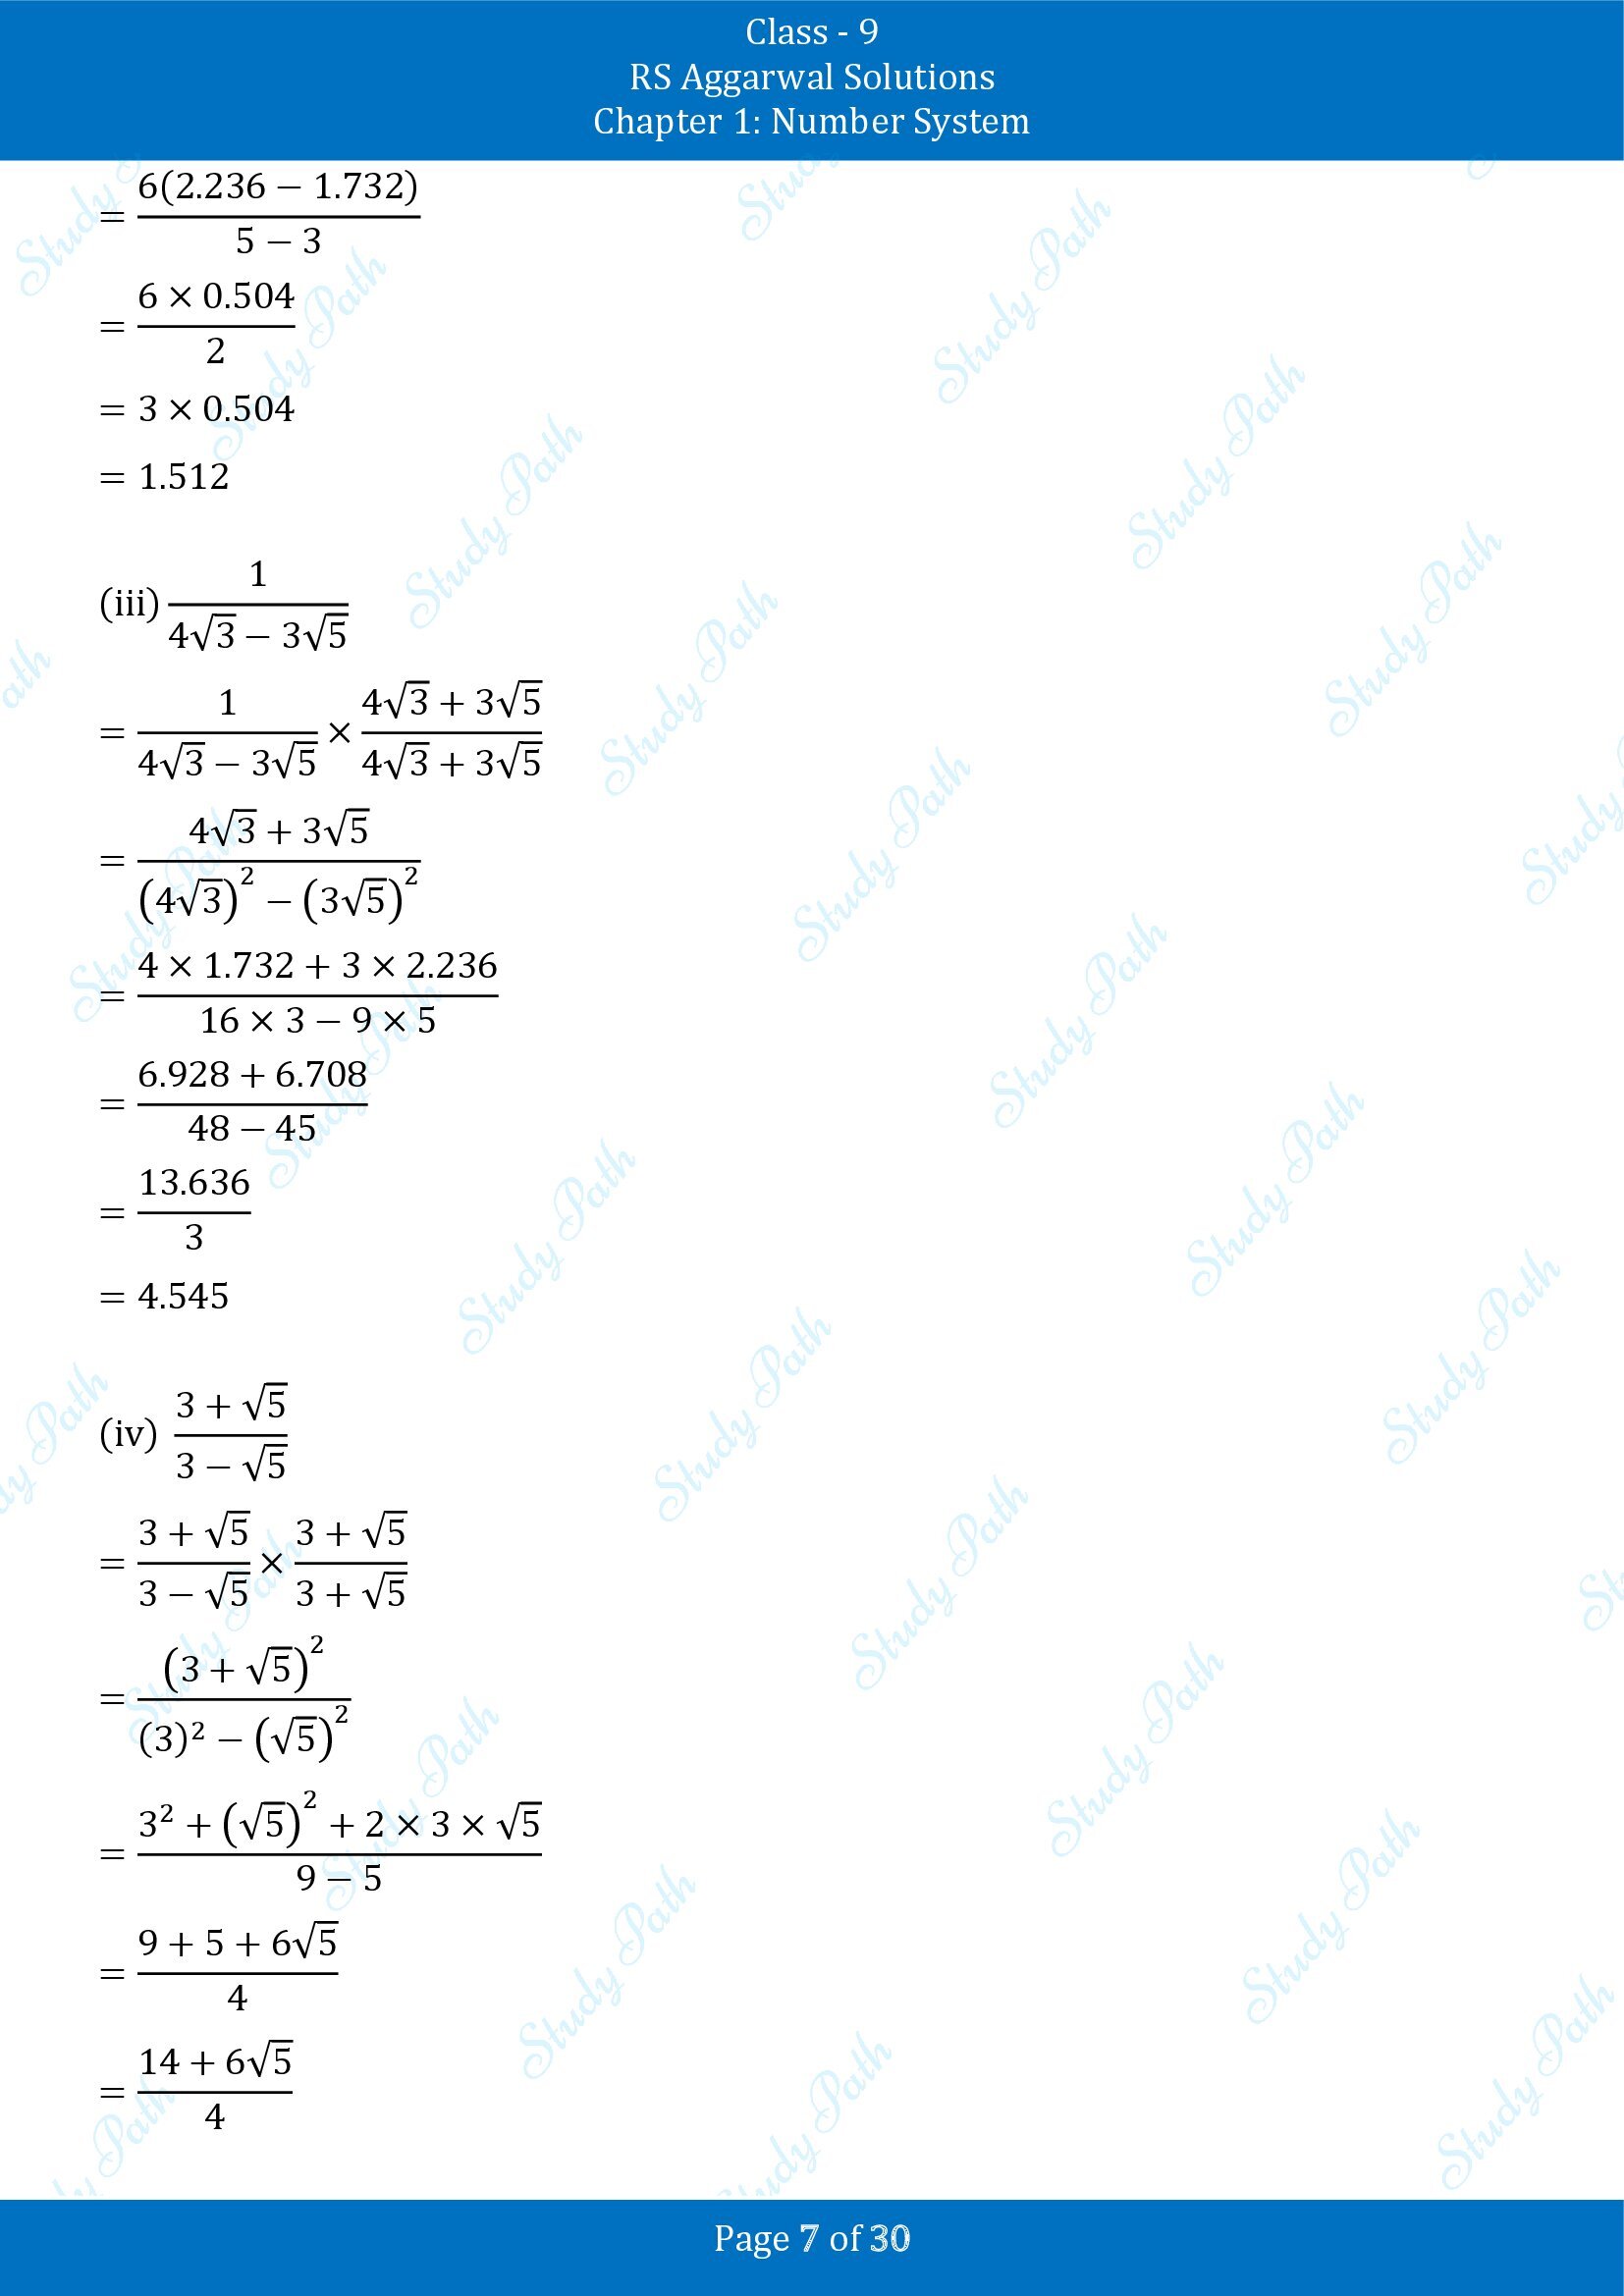 RS Aggarwal Solutions Class 9 Chapter 1 Number System Exercise 1F 00007